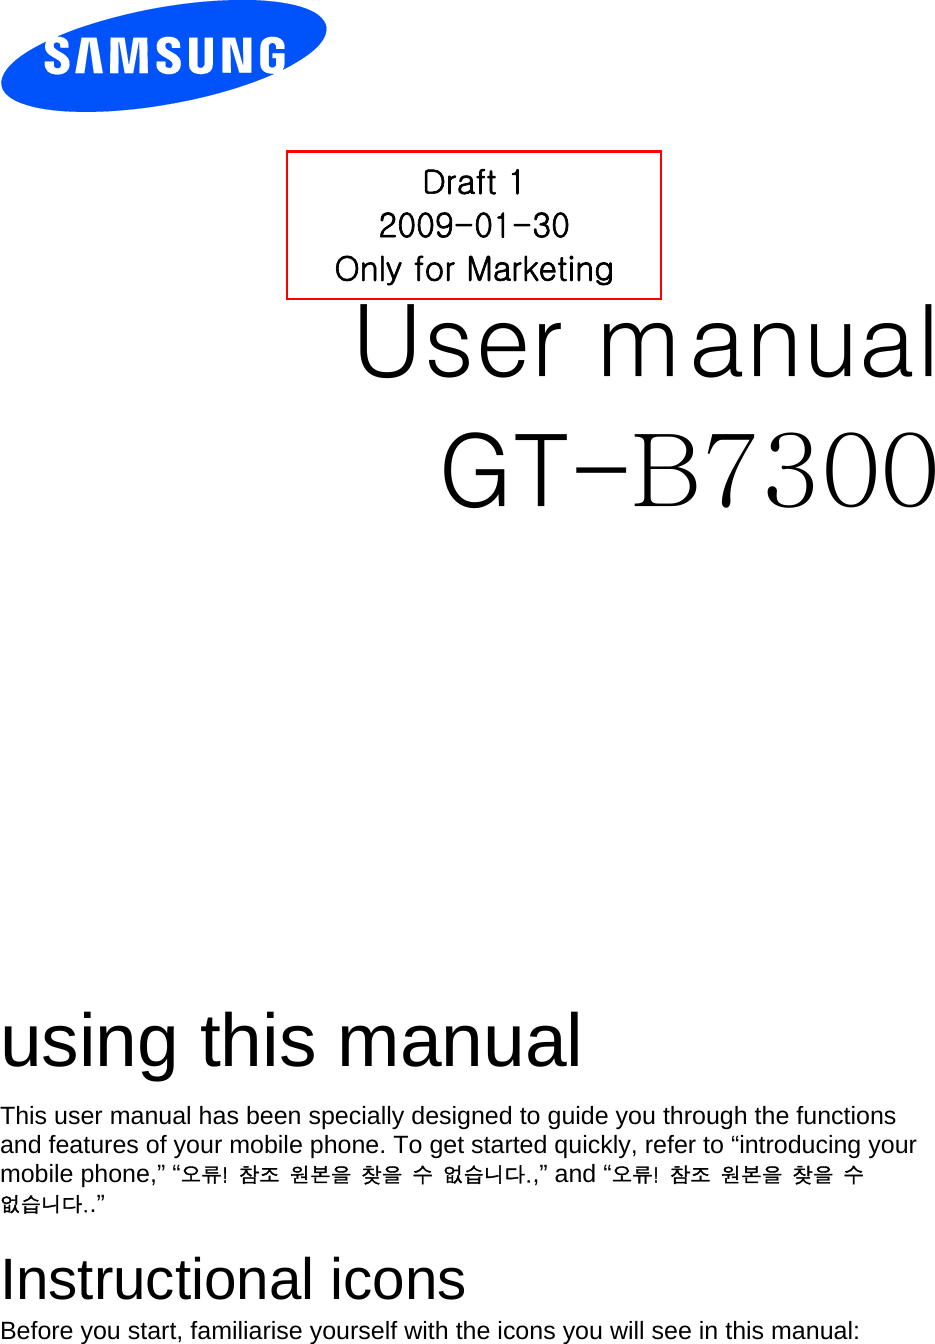          User manual Draft 1 2009-01-30 Only for Marketing GT-B7300                  using this manual This user manual has been specially designed to guide you through the functions and features of your mobile phone. To get started quickly, refer to “introducing your mobile phone,” “오류!  참조  원본을  찾을  수  없습니다.,” and “오류!  참조  원본을  찾을  수 없습니다..”  Instructional icons Before you start, familiarise yourself with the icons you will see in this manual:   